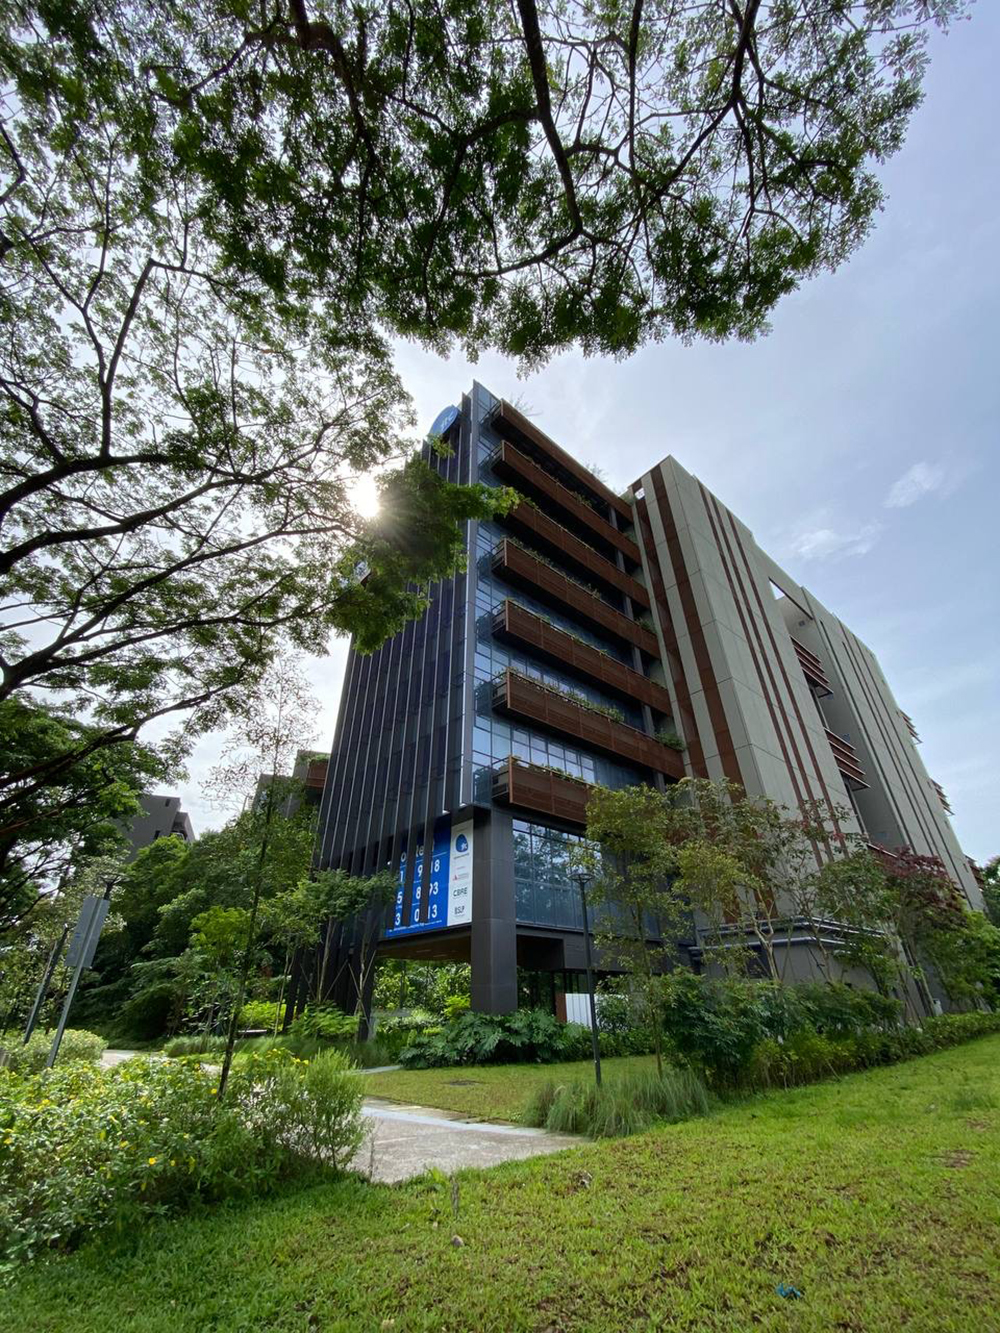 The new facility will be located at the Jurong Innovation District’s CleanTech Park, Singapore’s first eco-business park specifically designed to support clean and sustainable manufacturing and urban solutions. (Image Source: JTC Singapore)